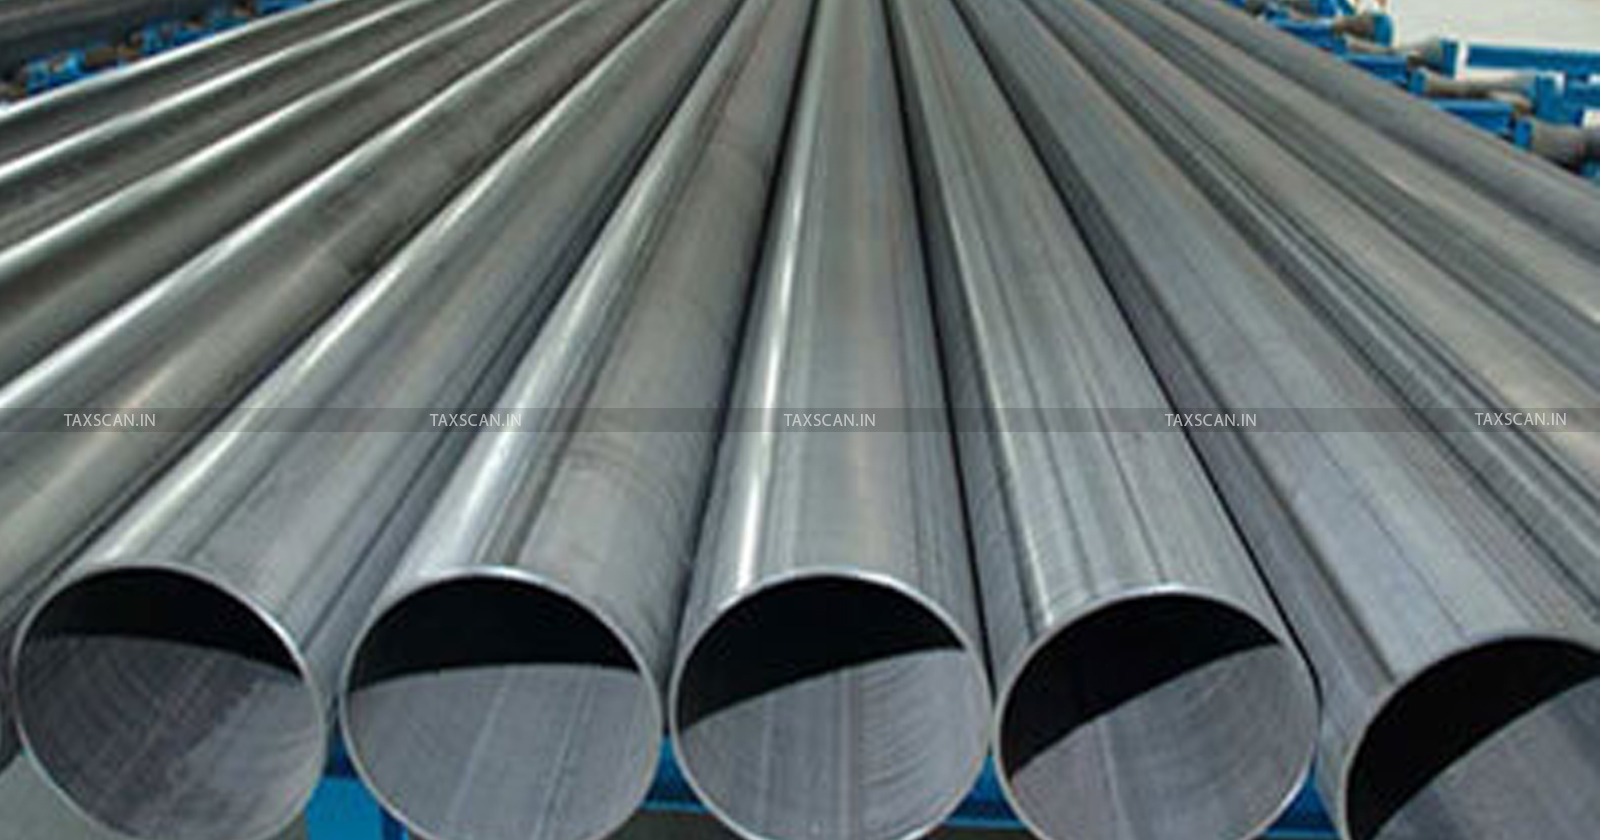 Central Government - Countervailing Duty on Imports - Countervailing Duty - Welded Stainless-Steel Pipes and Tube from China and Vietnam - Welded Stainless-Steel Pipes - taxscan